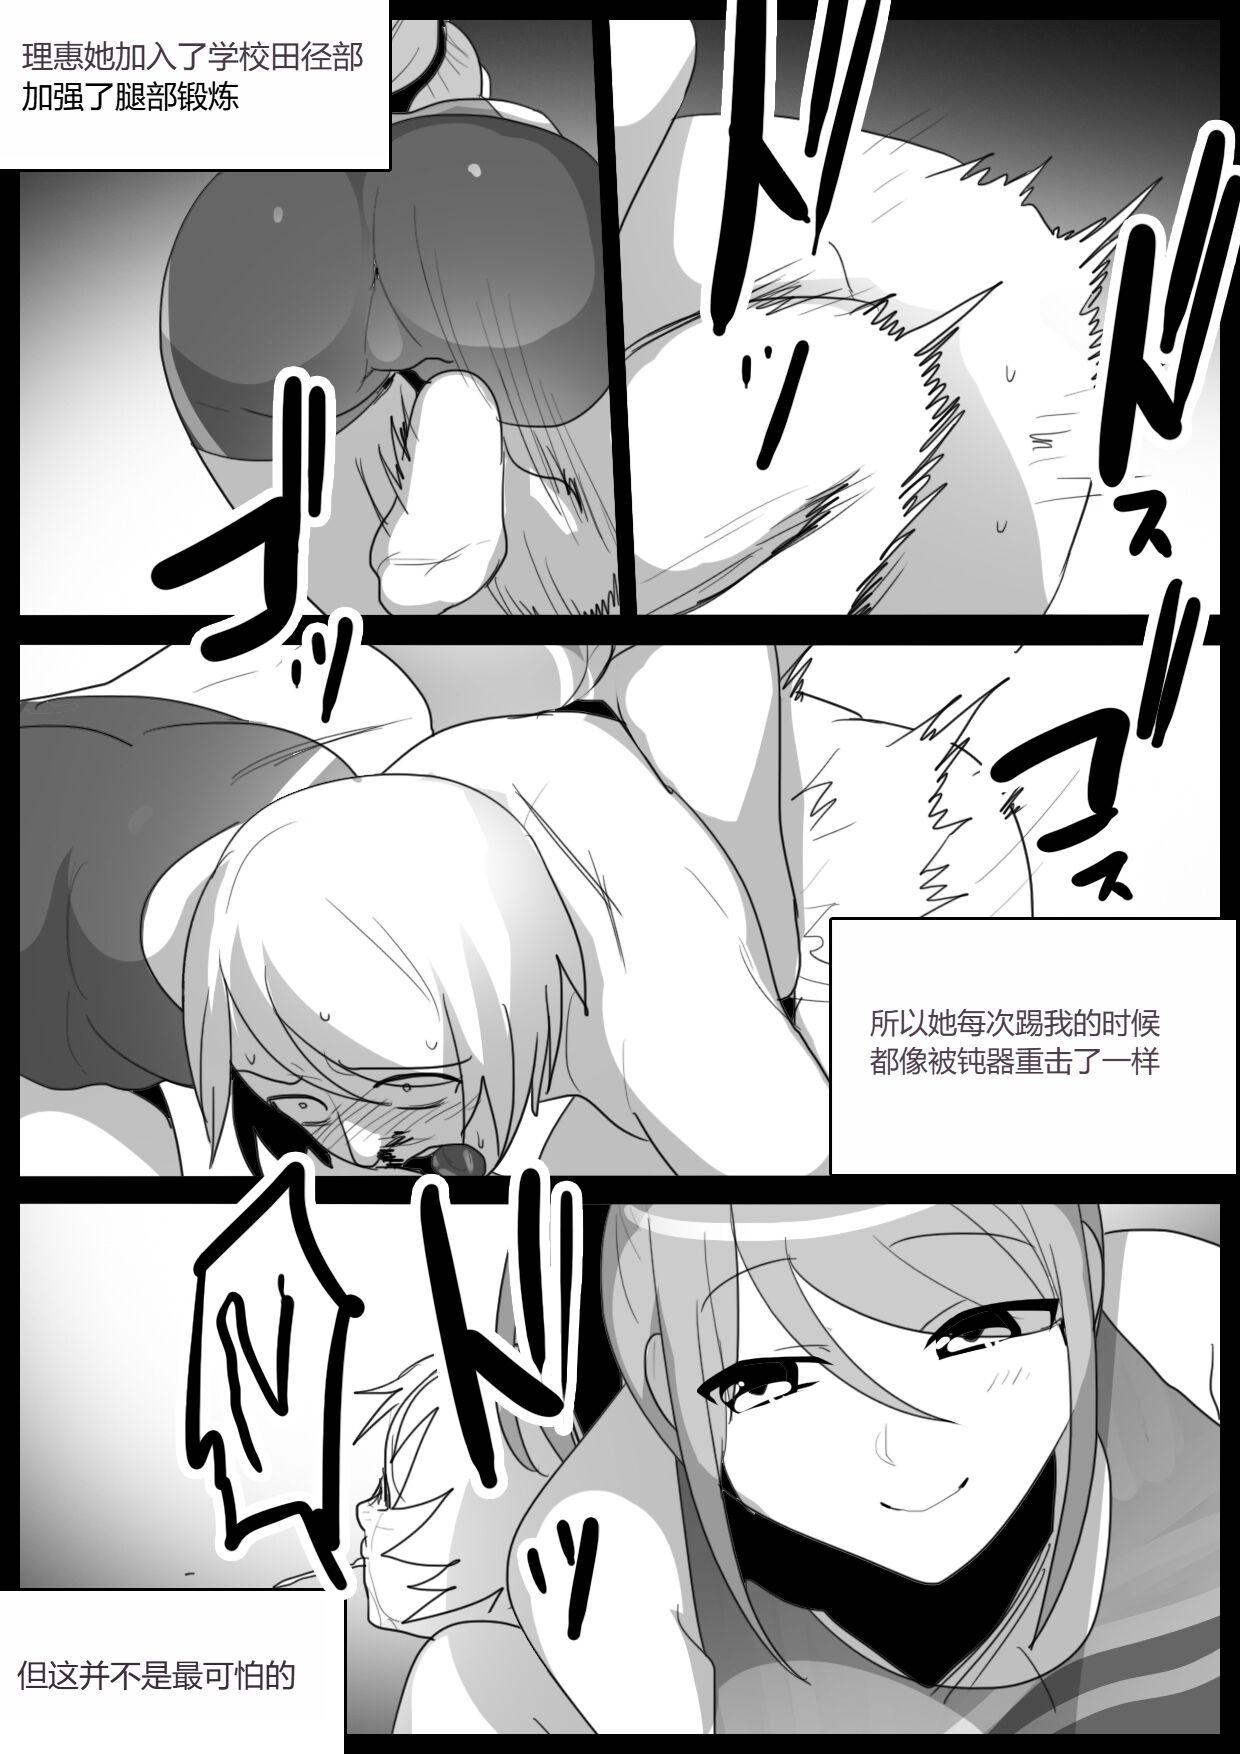 Casero Spin-Off of Girls Beat by Rie 一个人汉化 - Original Thailand - Page 7